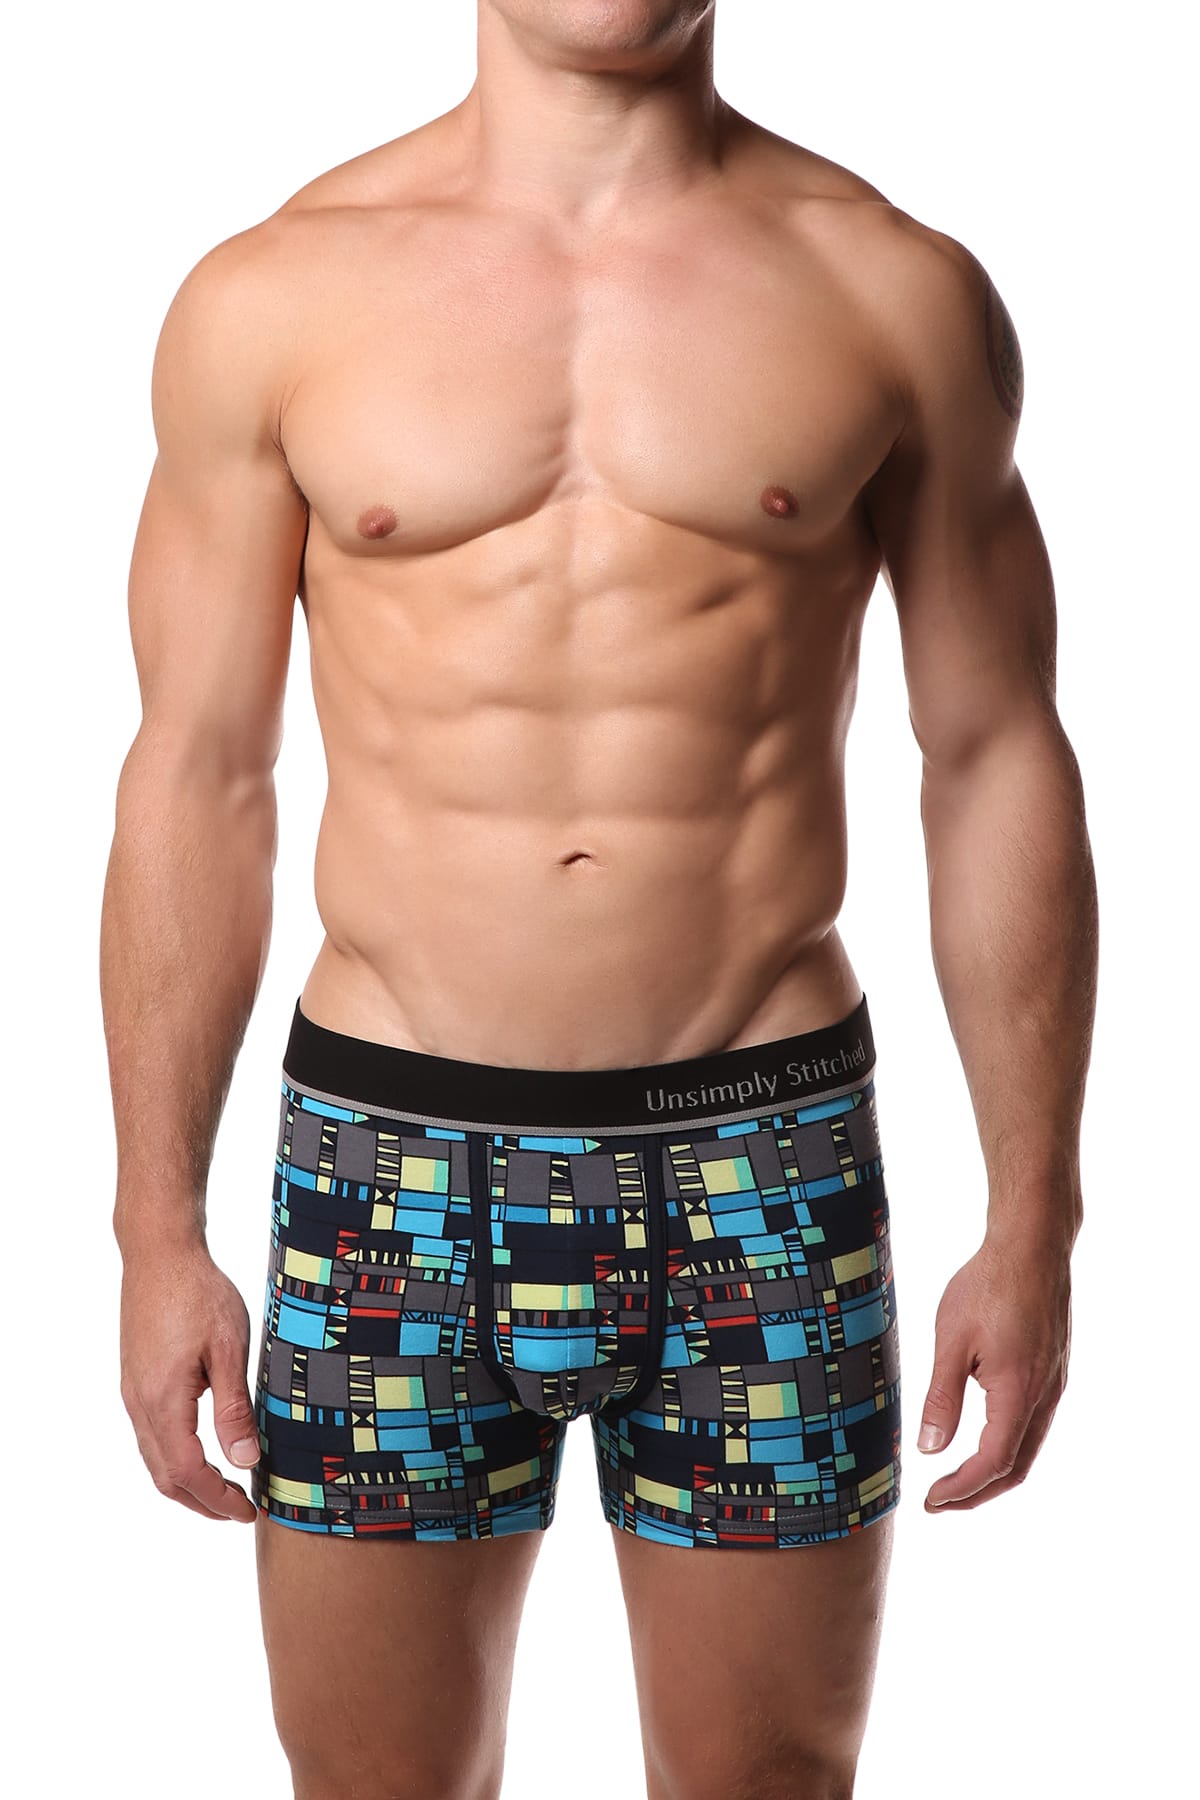 Unsimply Stitched Abstract Squares Trunk